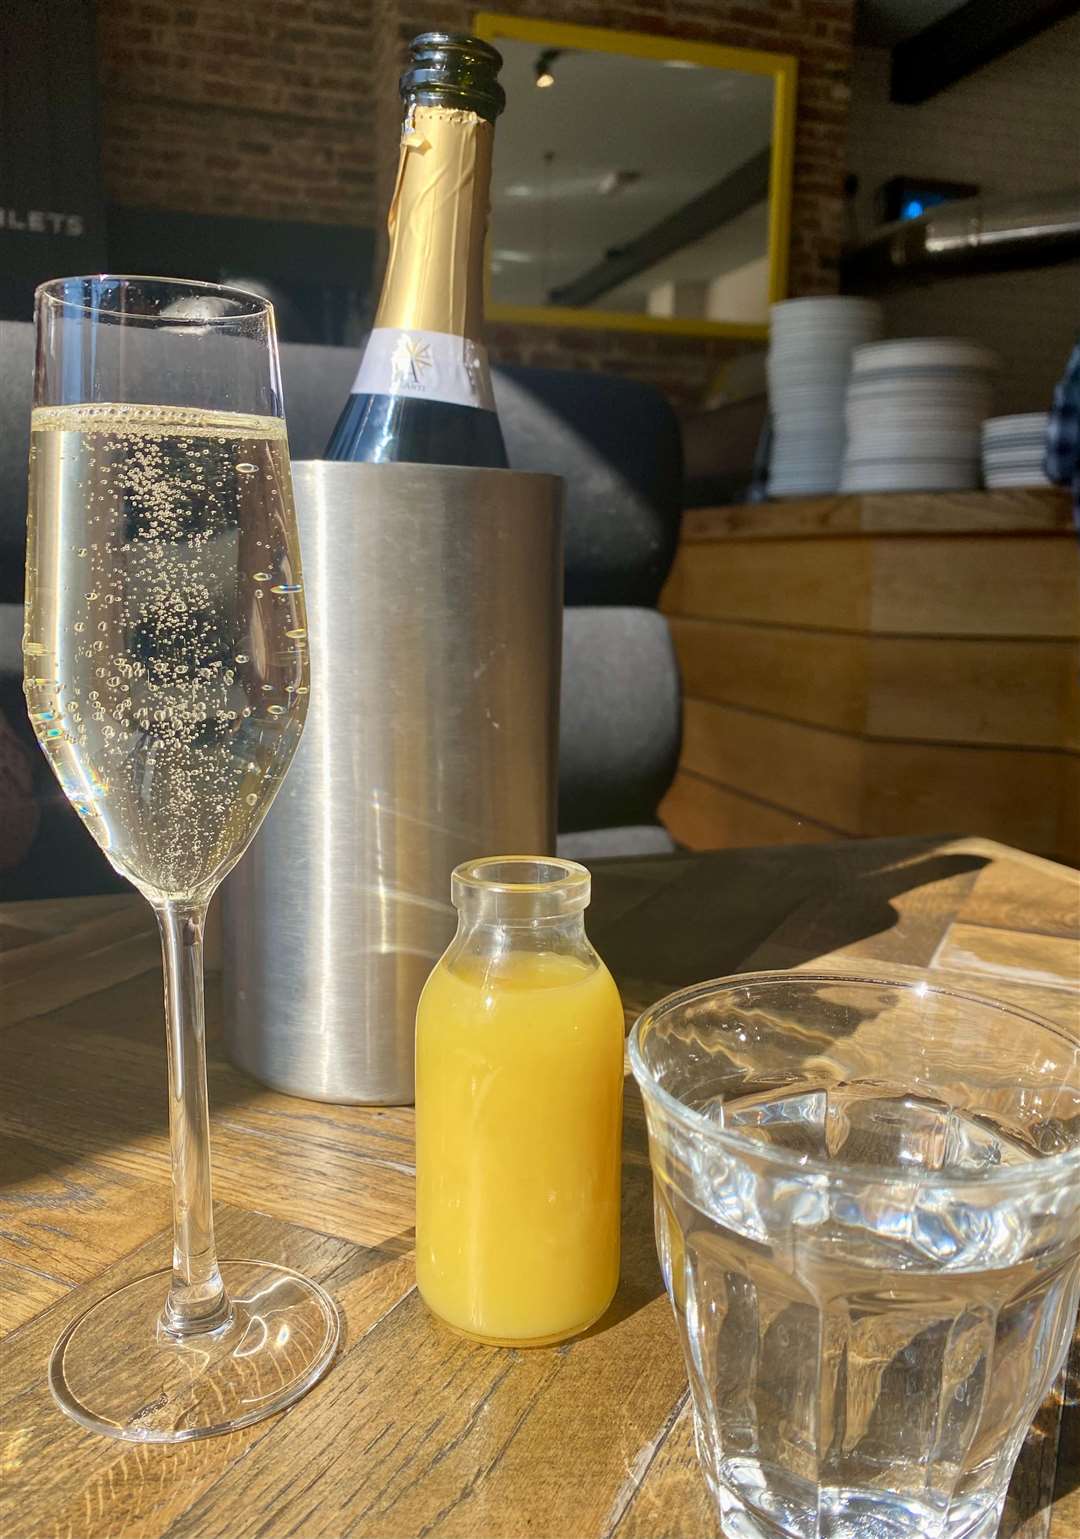 The bottomless brunch includes bottles of prosecco, water, peach purée and orange juice. Picture: Sam Lawrie